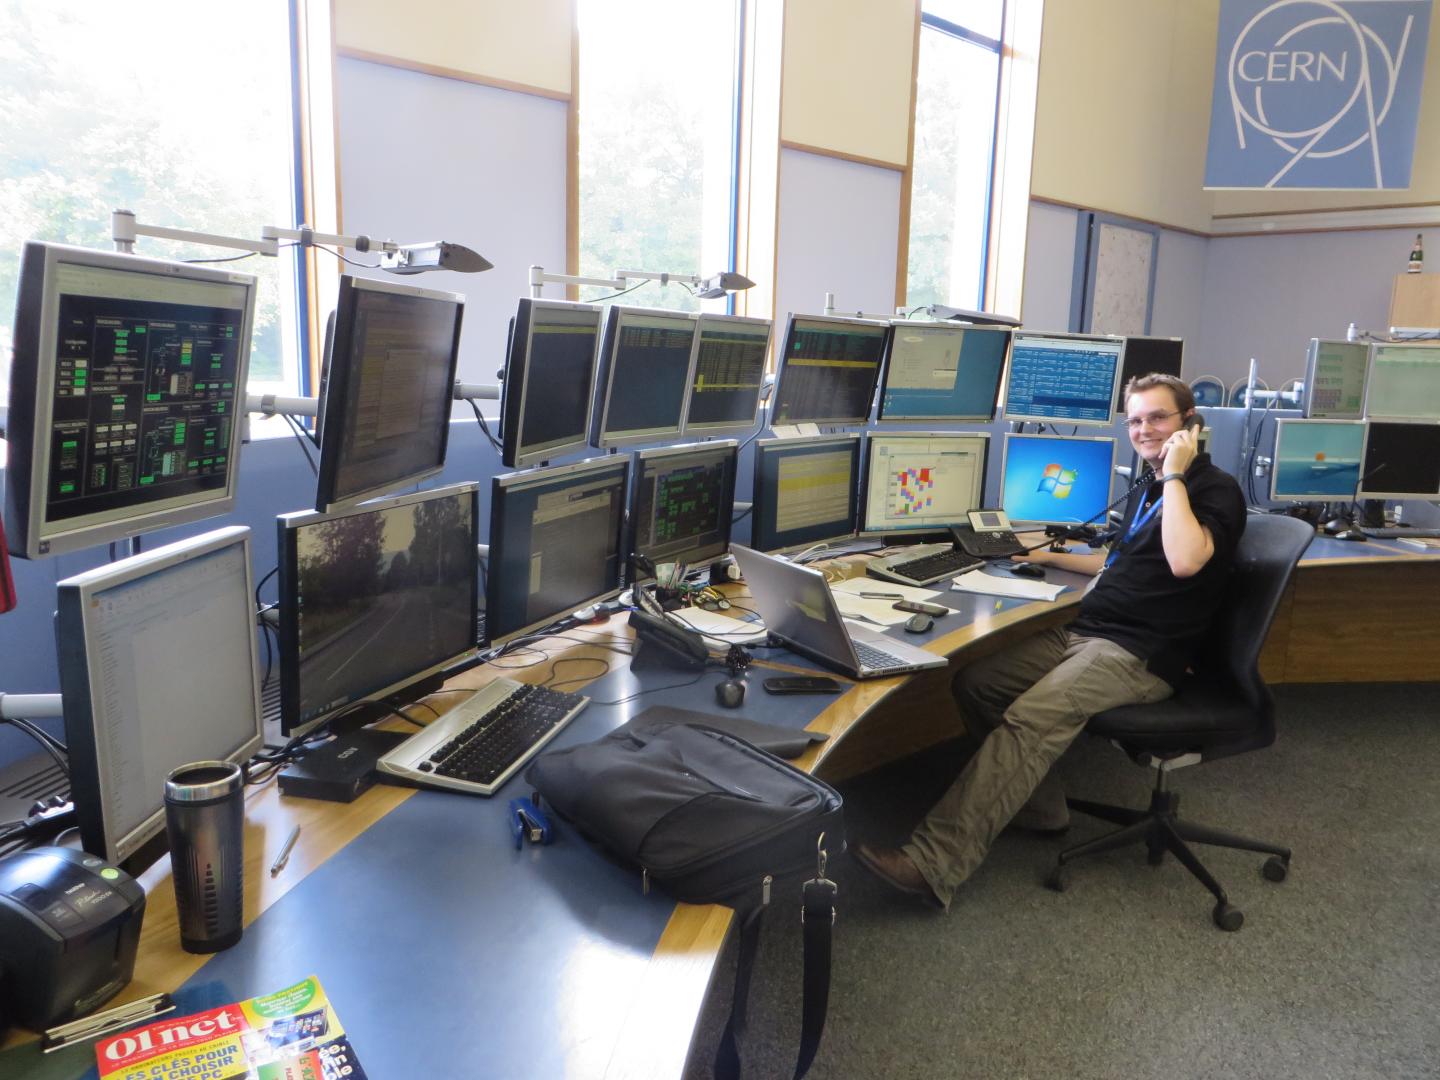 Technical troubleshooting at the CERN Control Centre